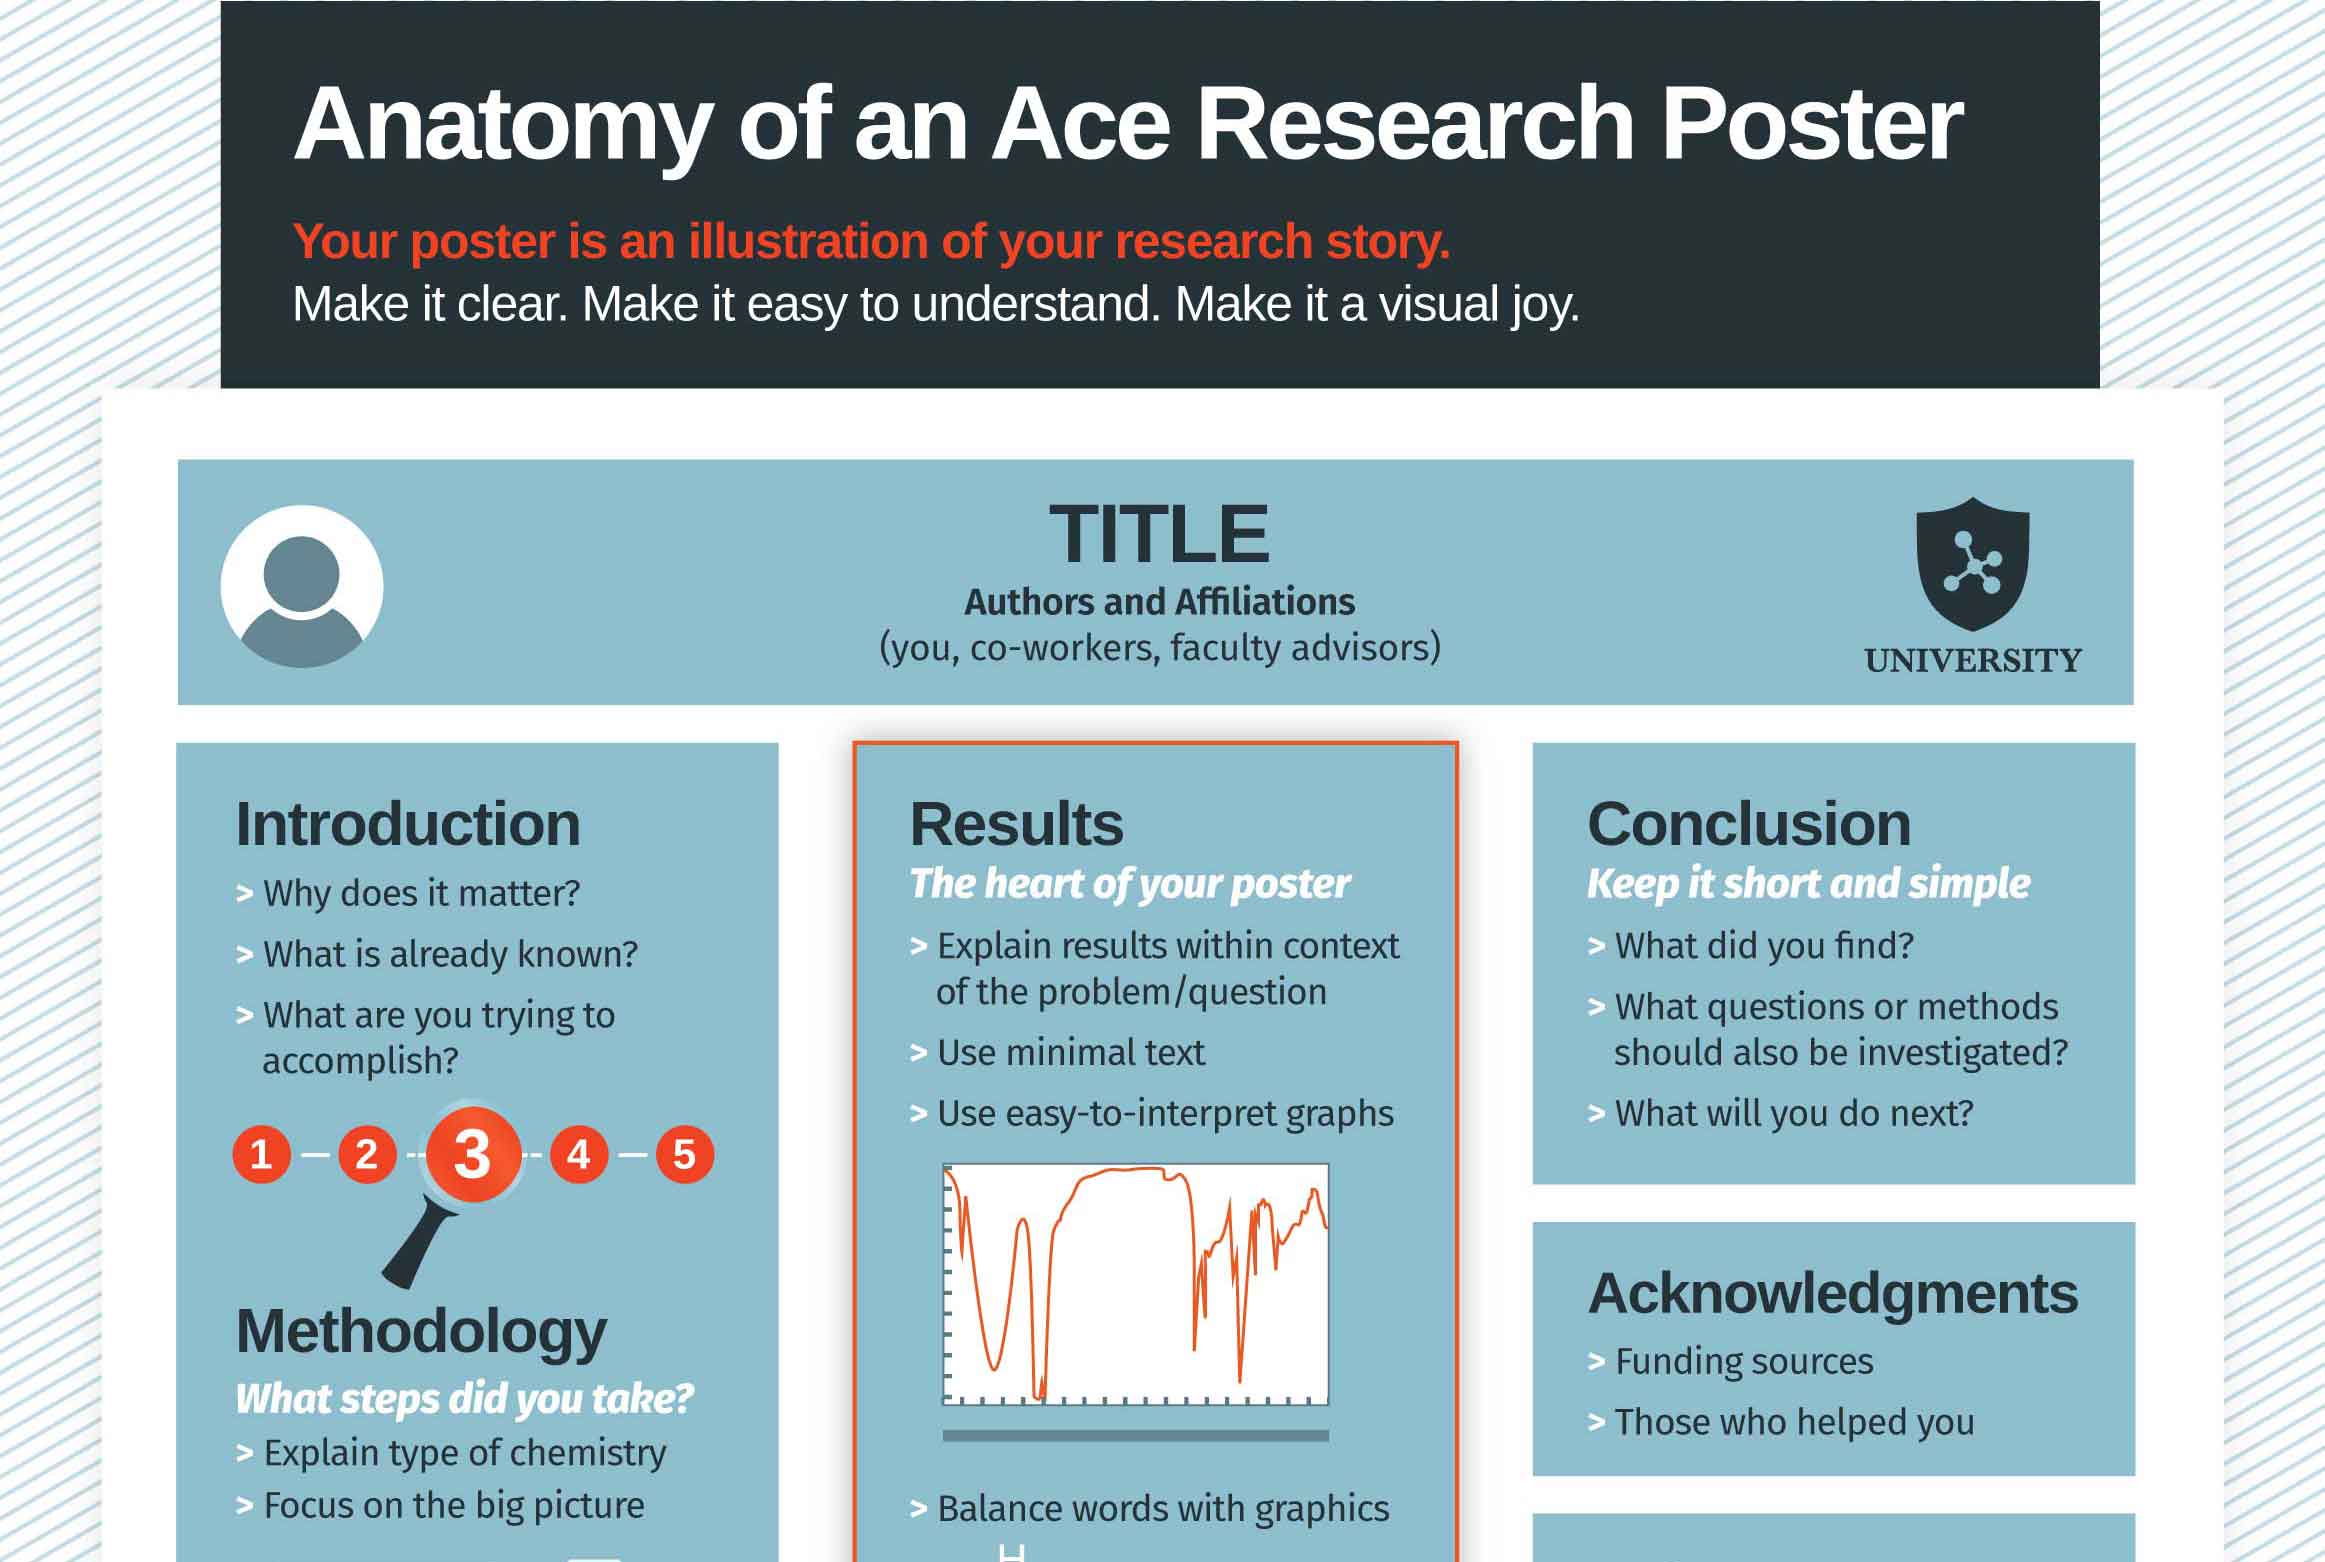 Anatomy of an Ace Research Poster image